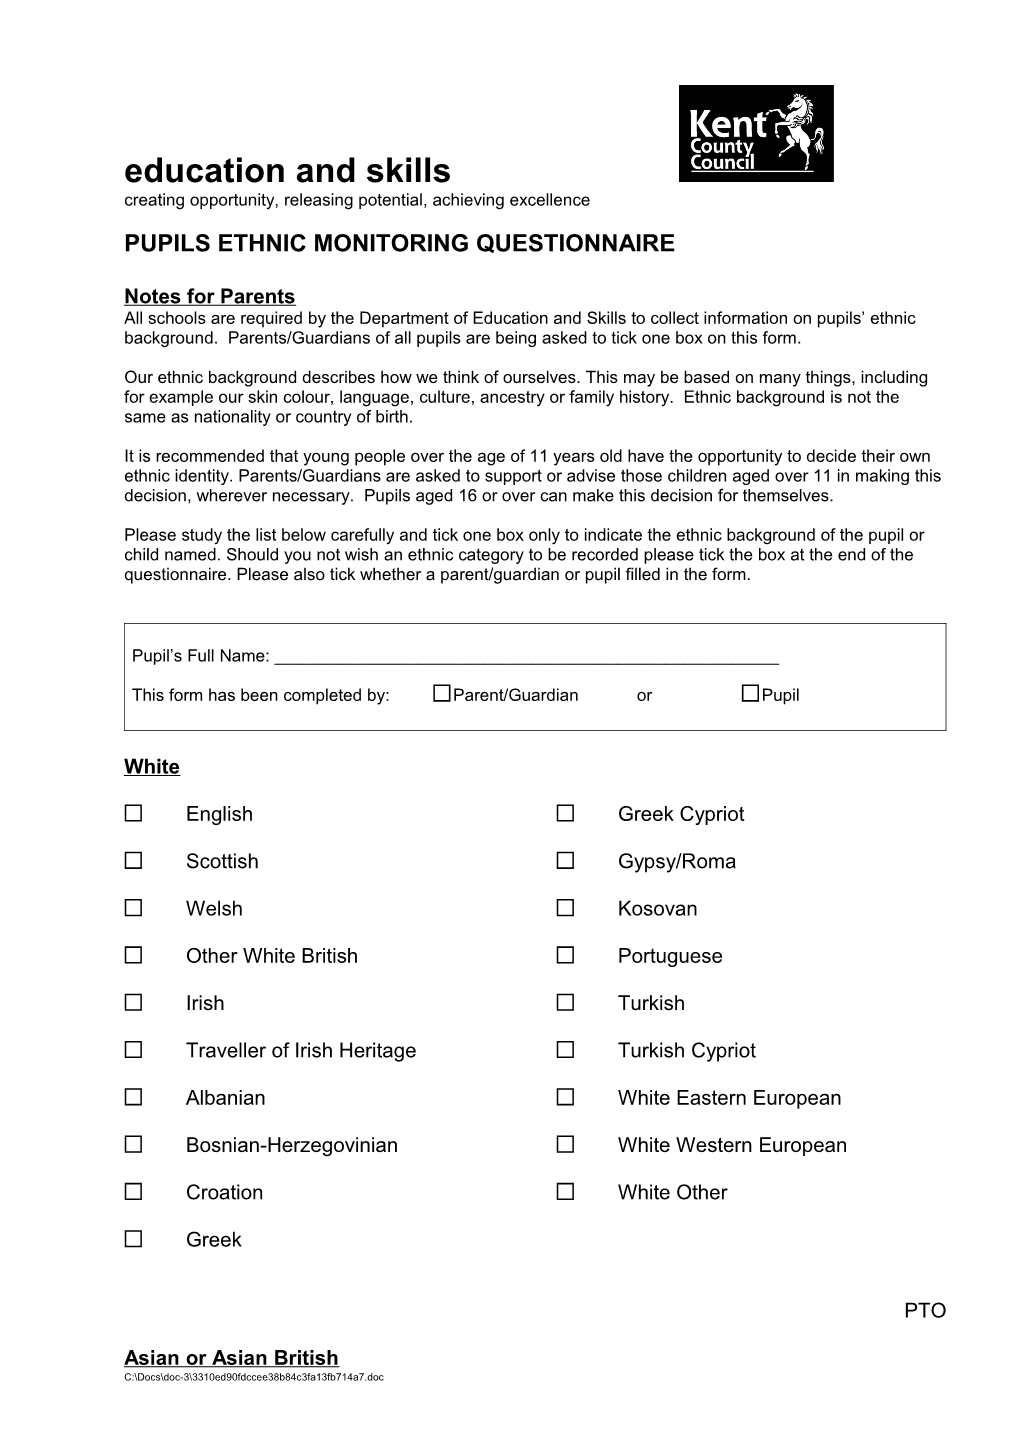 Pupils Ethnic Monitoring Questionnaire